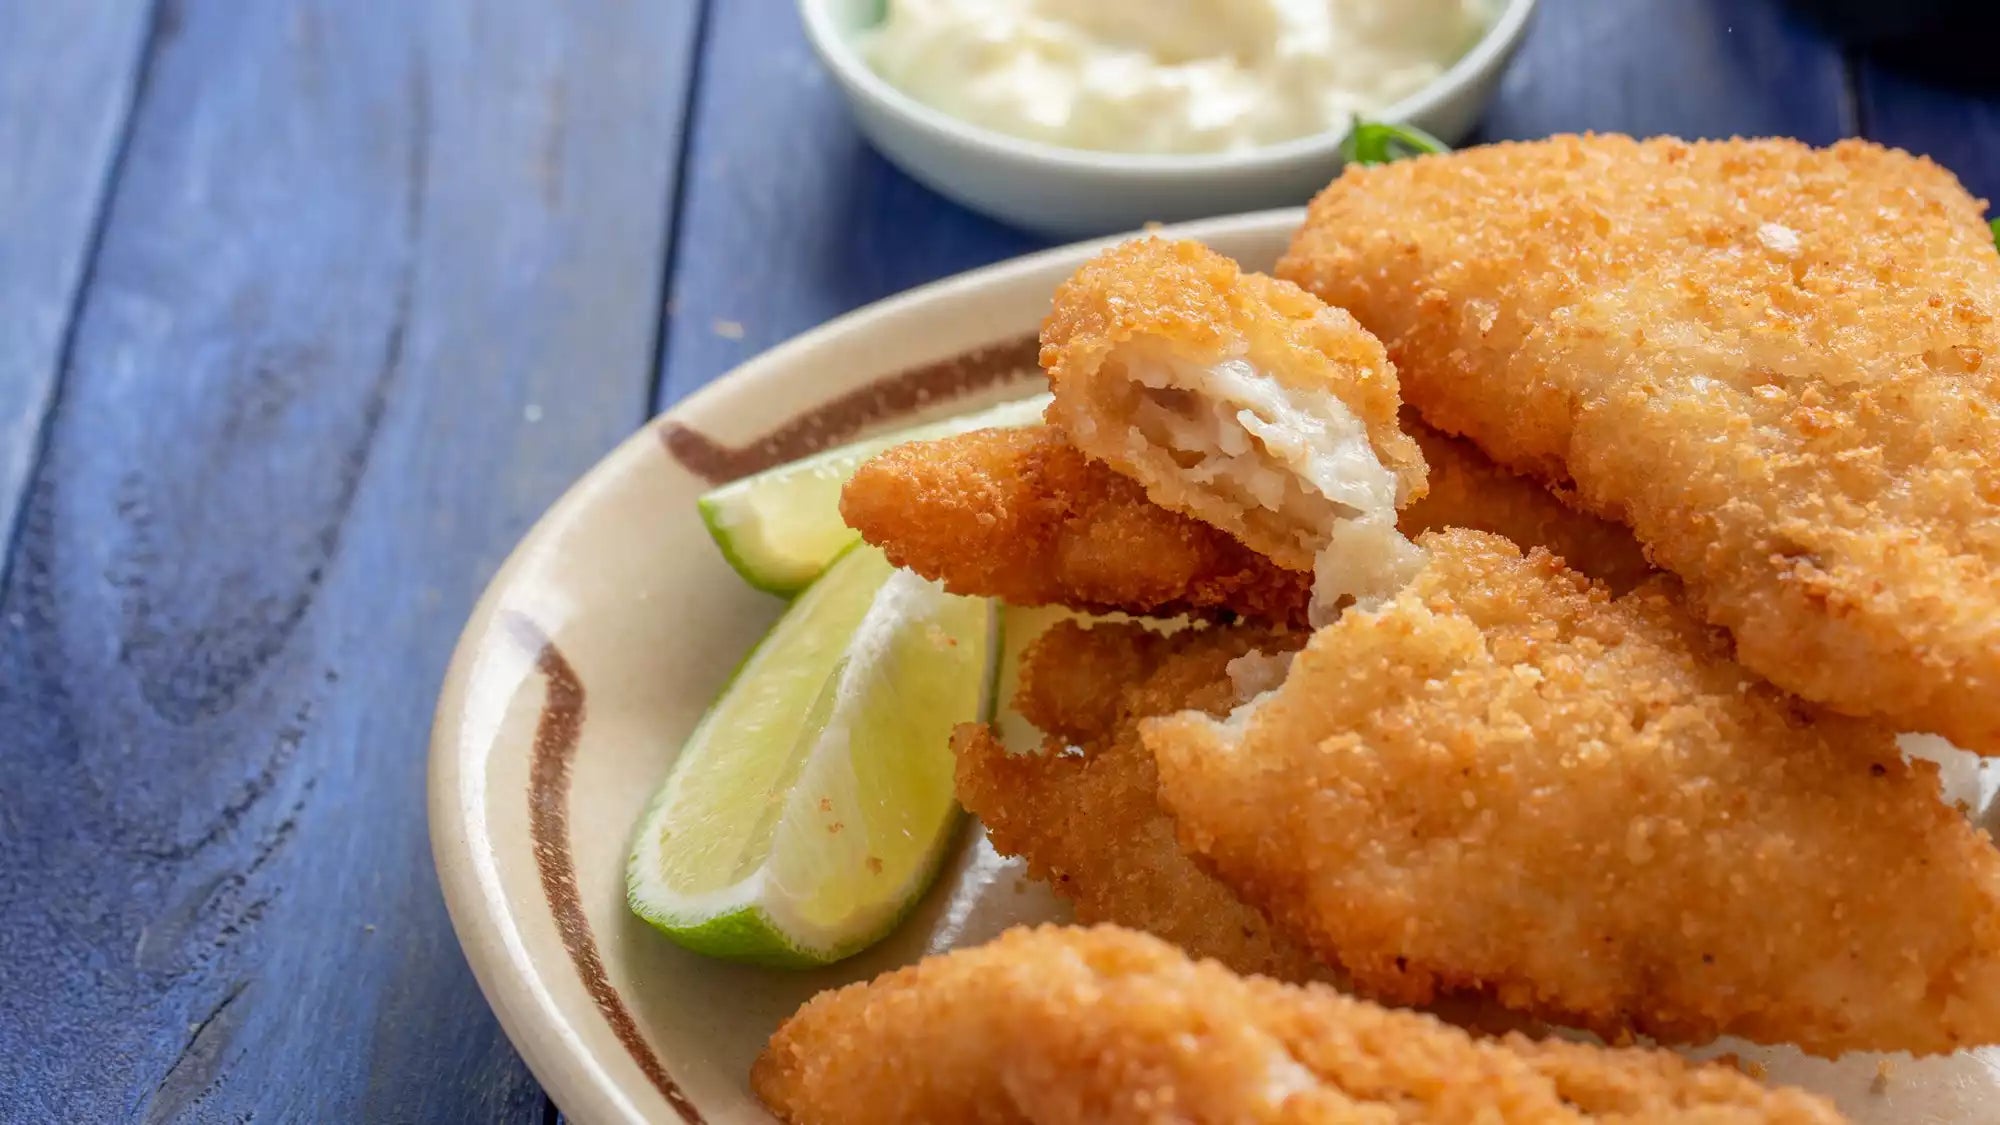 Beer Battered Fish Recipe for St. Patrick's Day